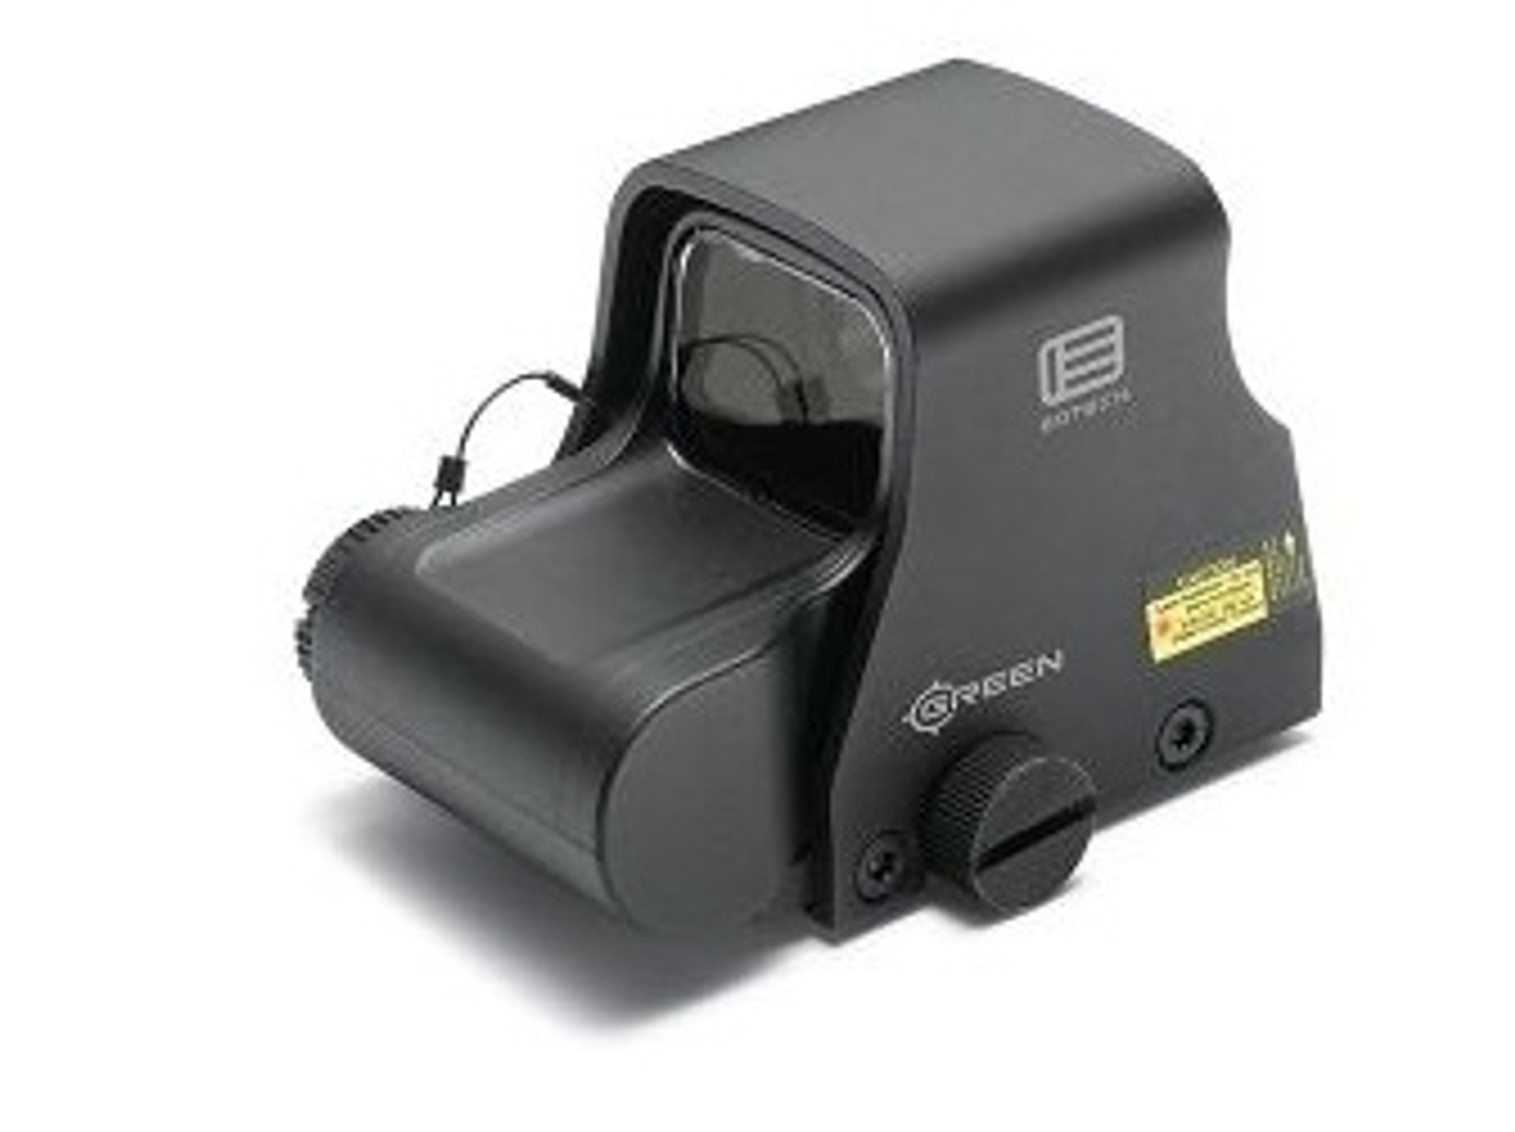 EOTech Holographic Weapon Sight - 1MOA Green Dot Reticle